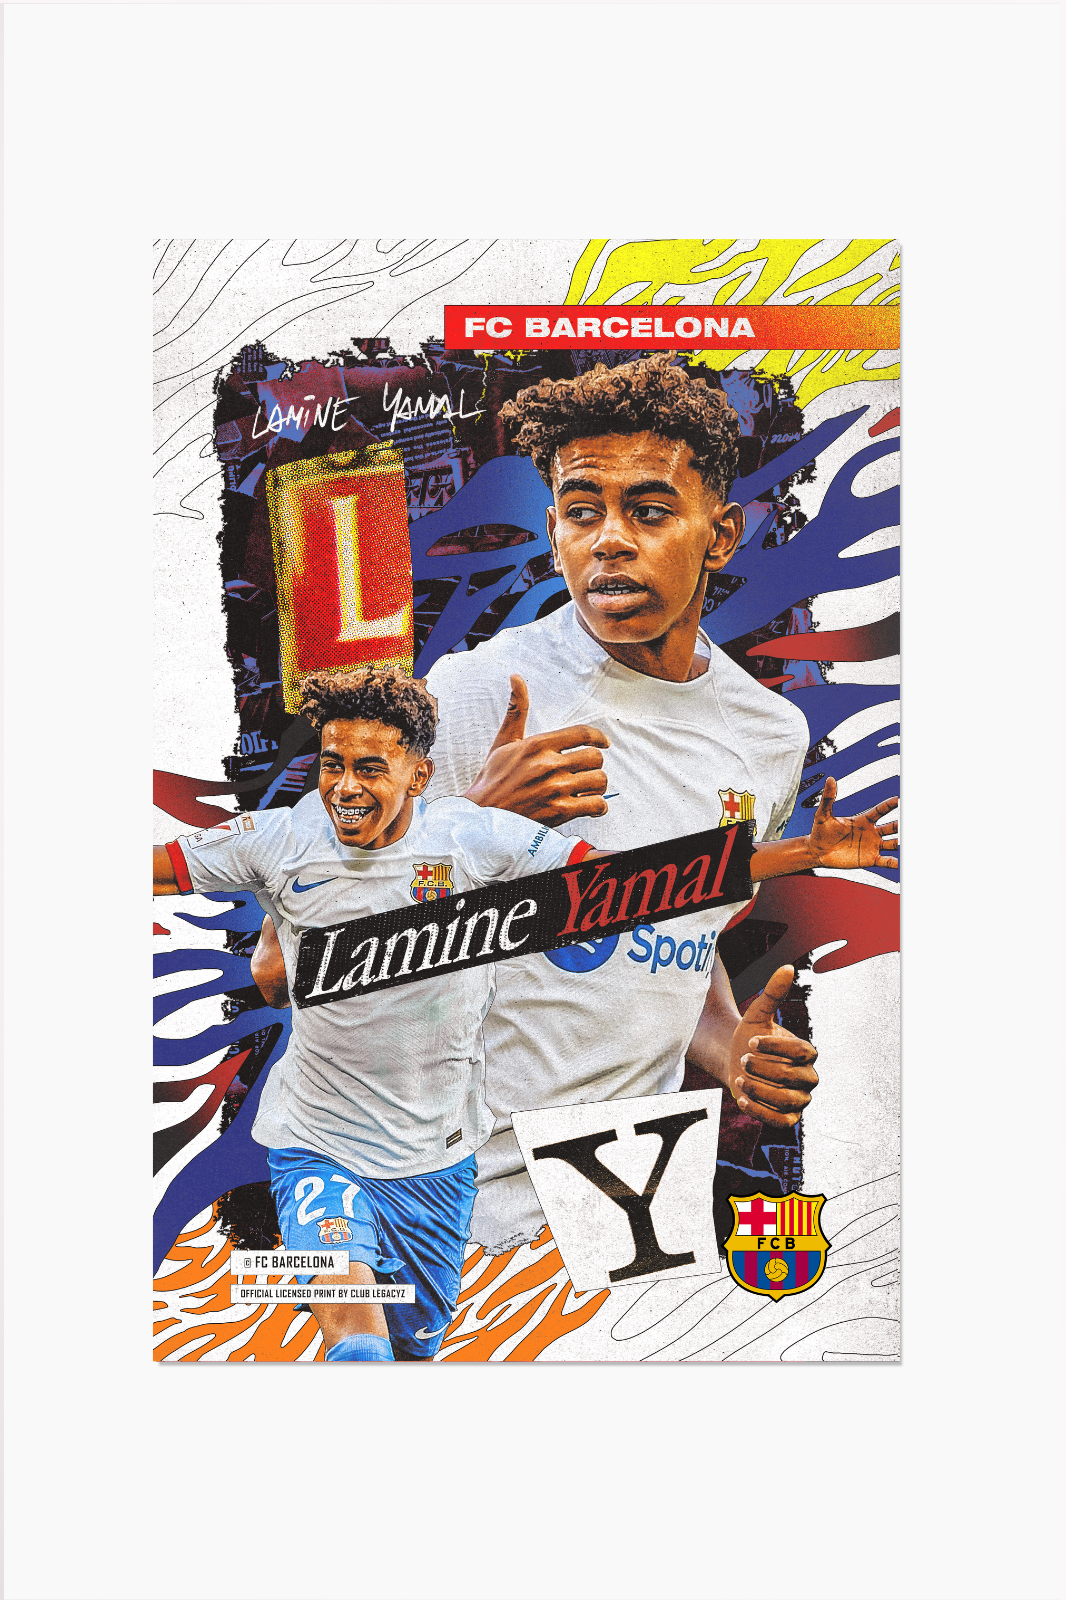 FC Barcelona - Lamine Yamal poster limited to 999